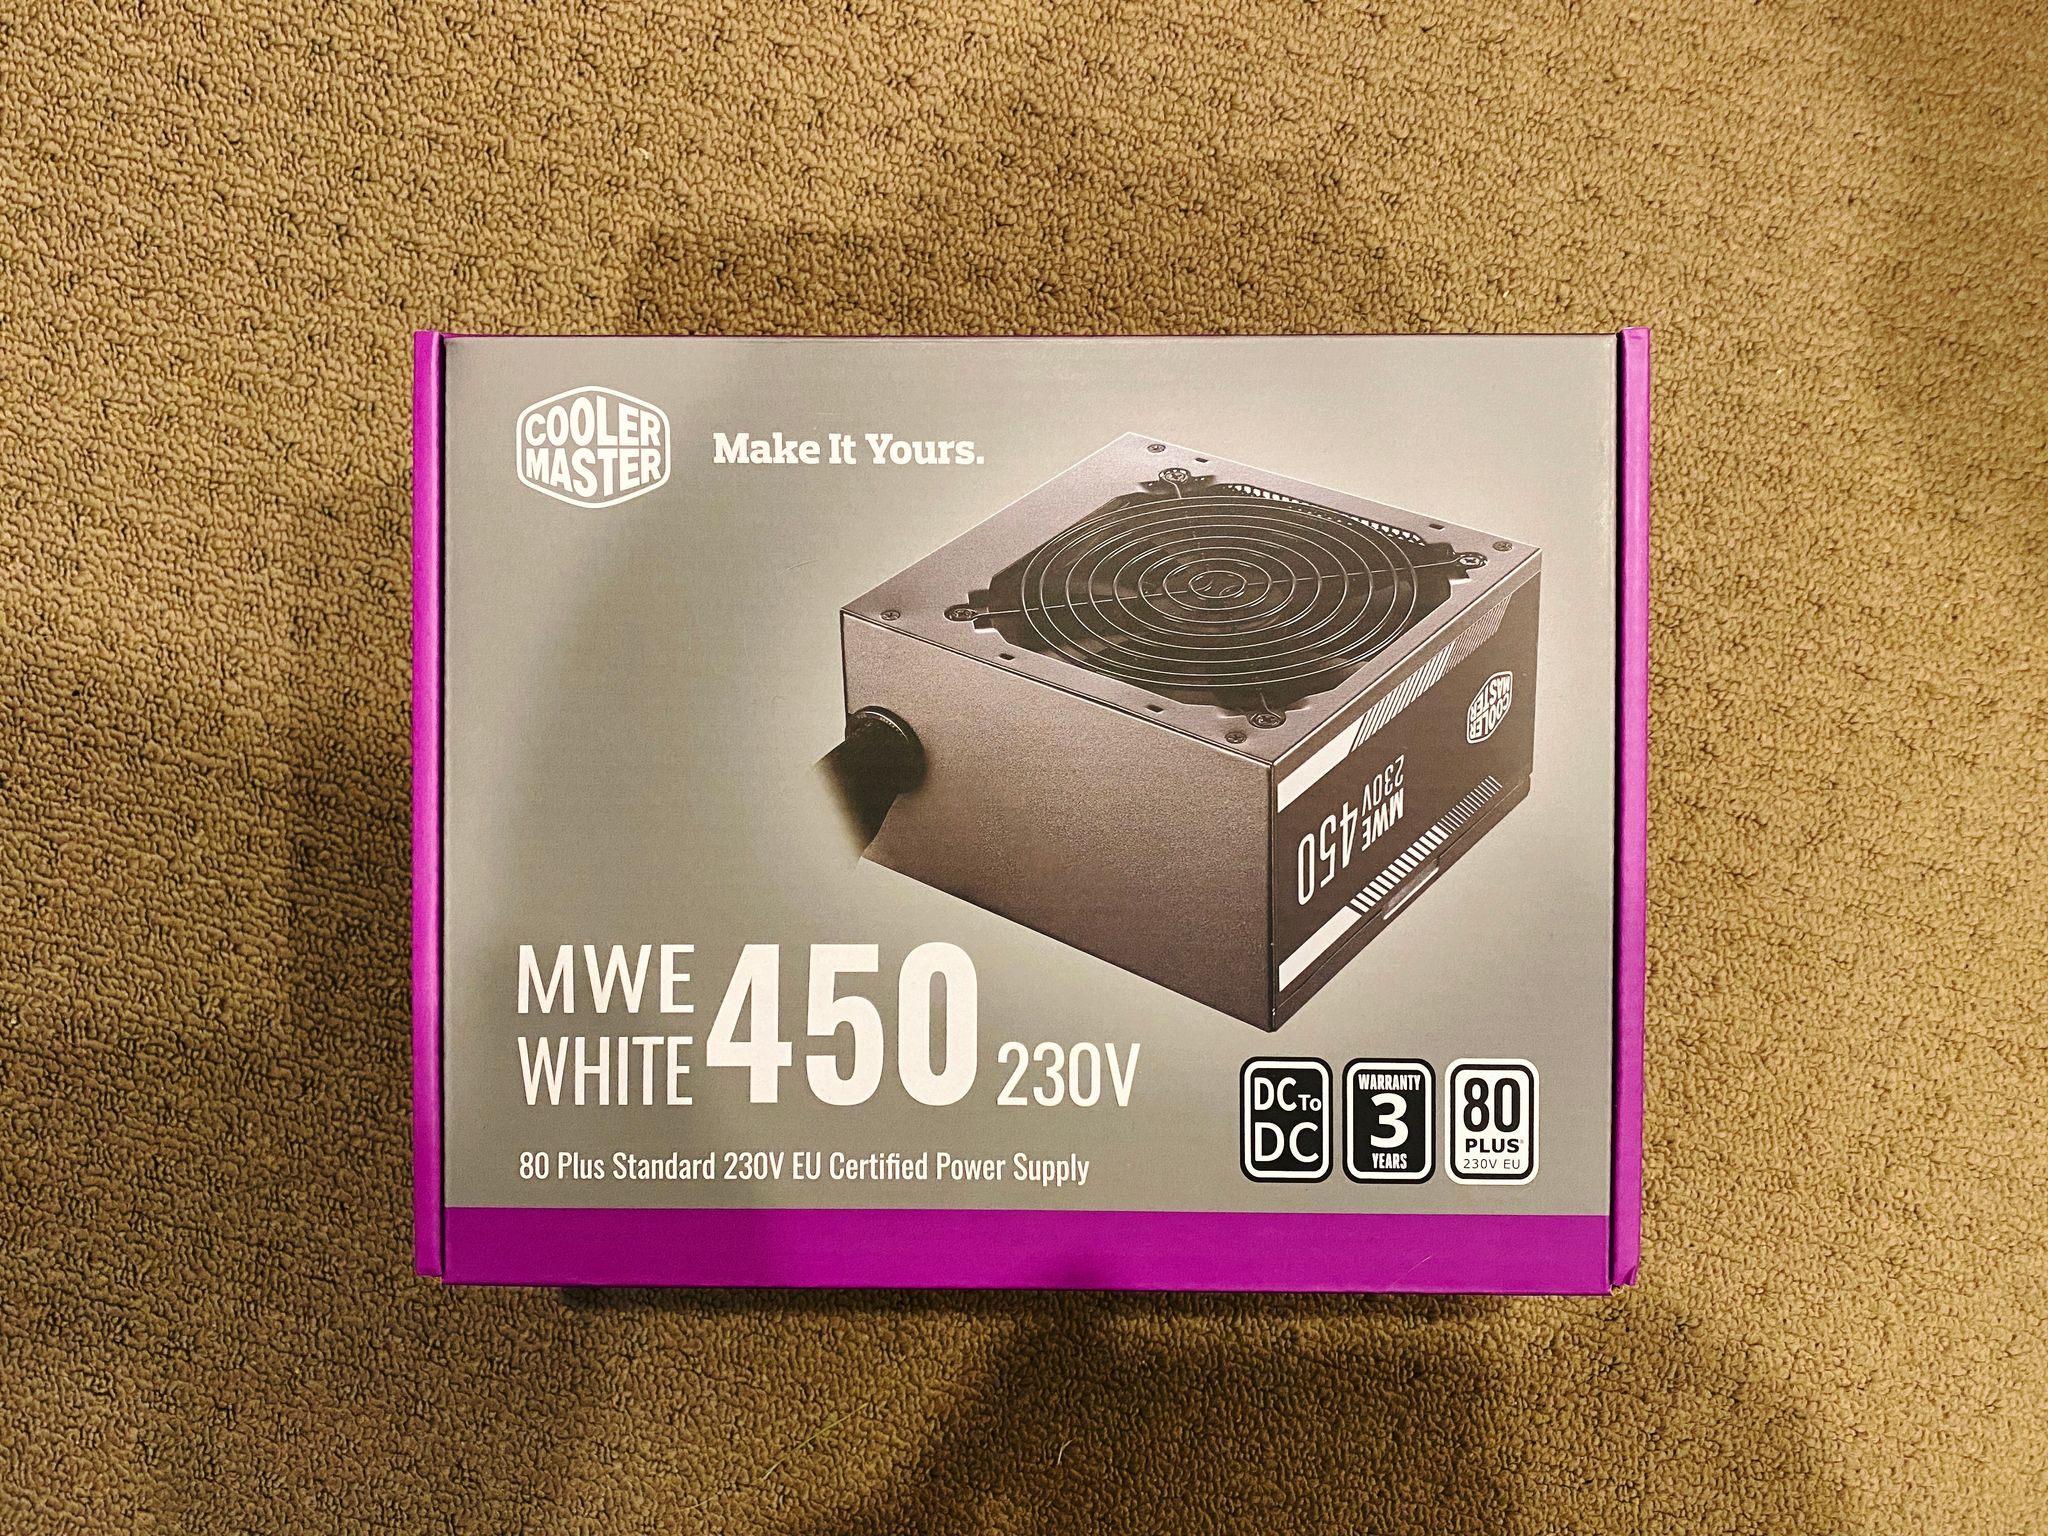 A photo of the box of a 450W CoolerMaster power supply.